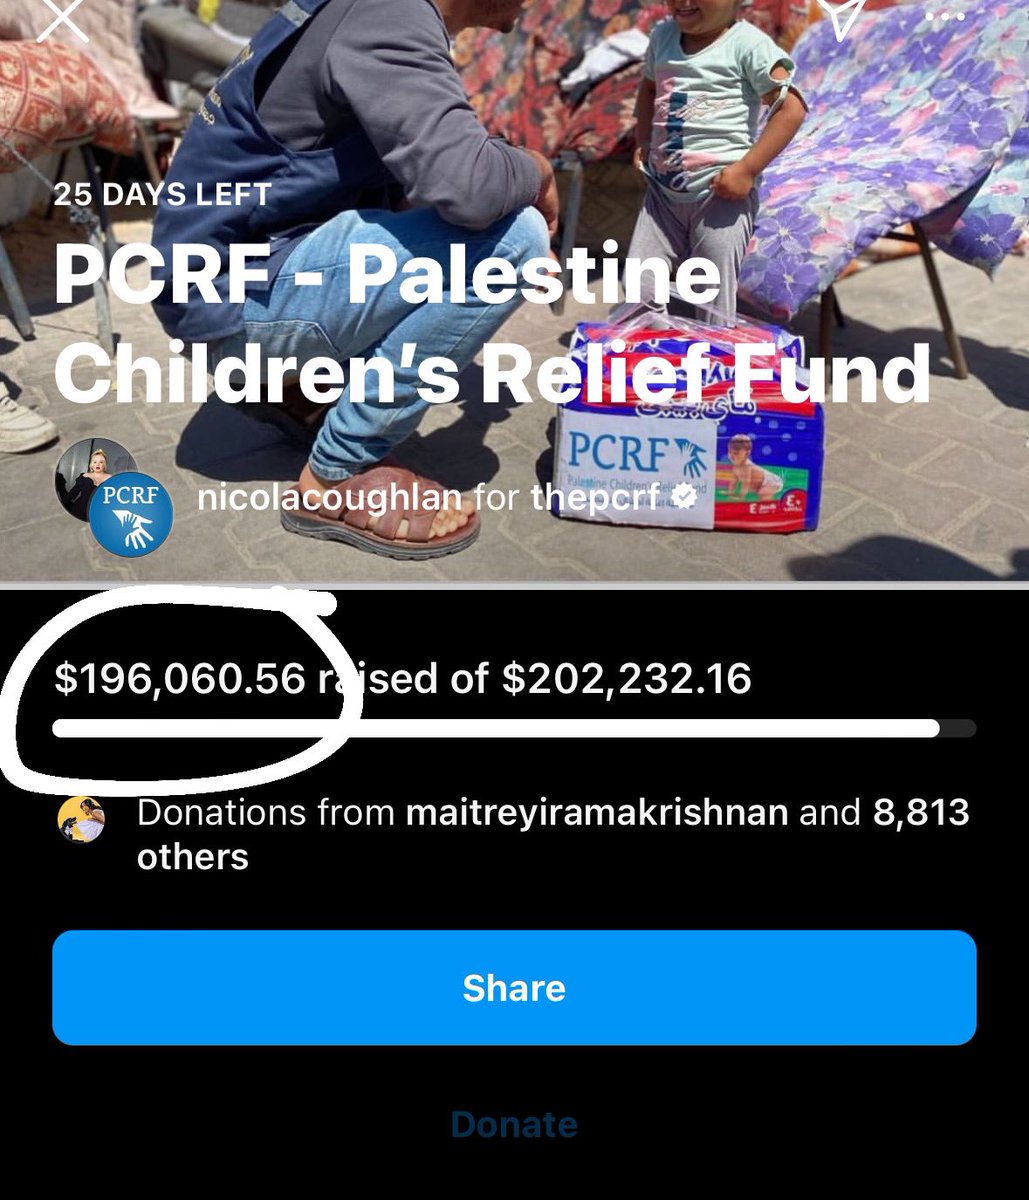 since ariana grande reposted the PCRF fundraiser on her story an HOUR ago, the amount raised has already increased OVER 20,000$ ! don’t ever say that celebrities raising awareness doesn’t matter, with how this is going ariana could potentially raise over $200K from her story.